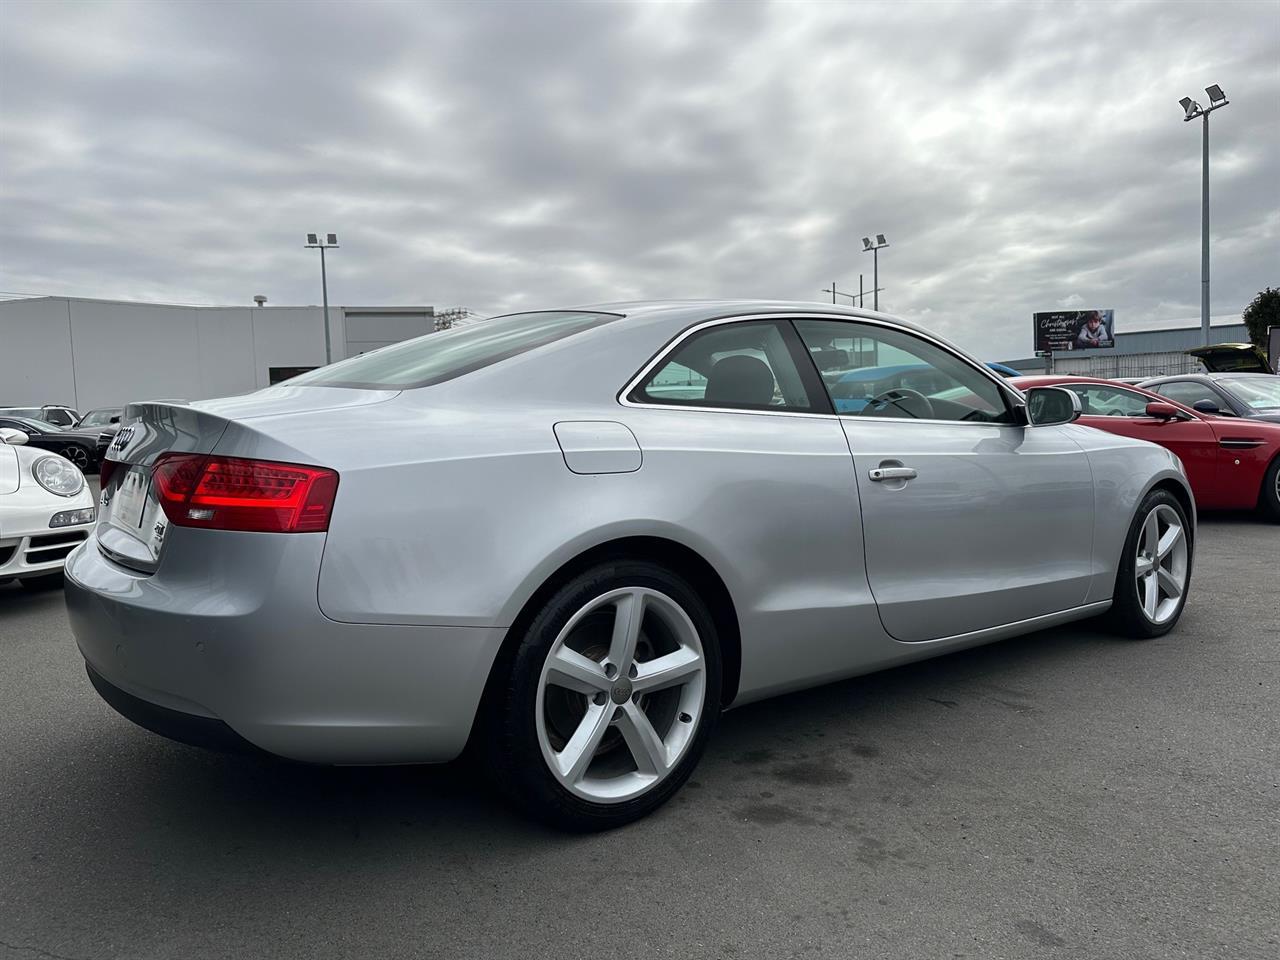 image-5, 2012 Audi A5 2.0 TFSI Quattro Facelift Coupe at Christchurch